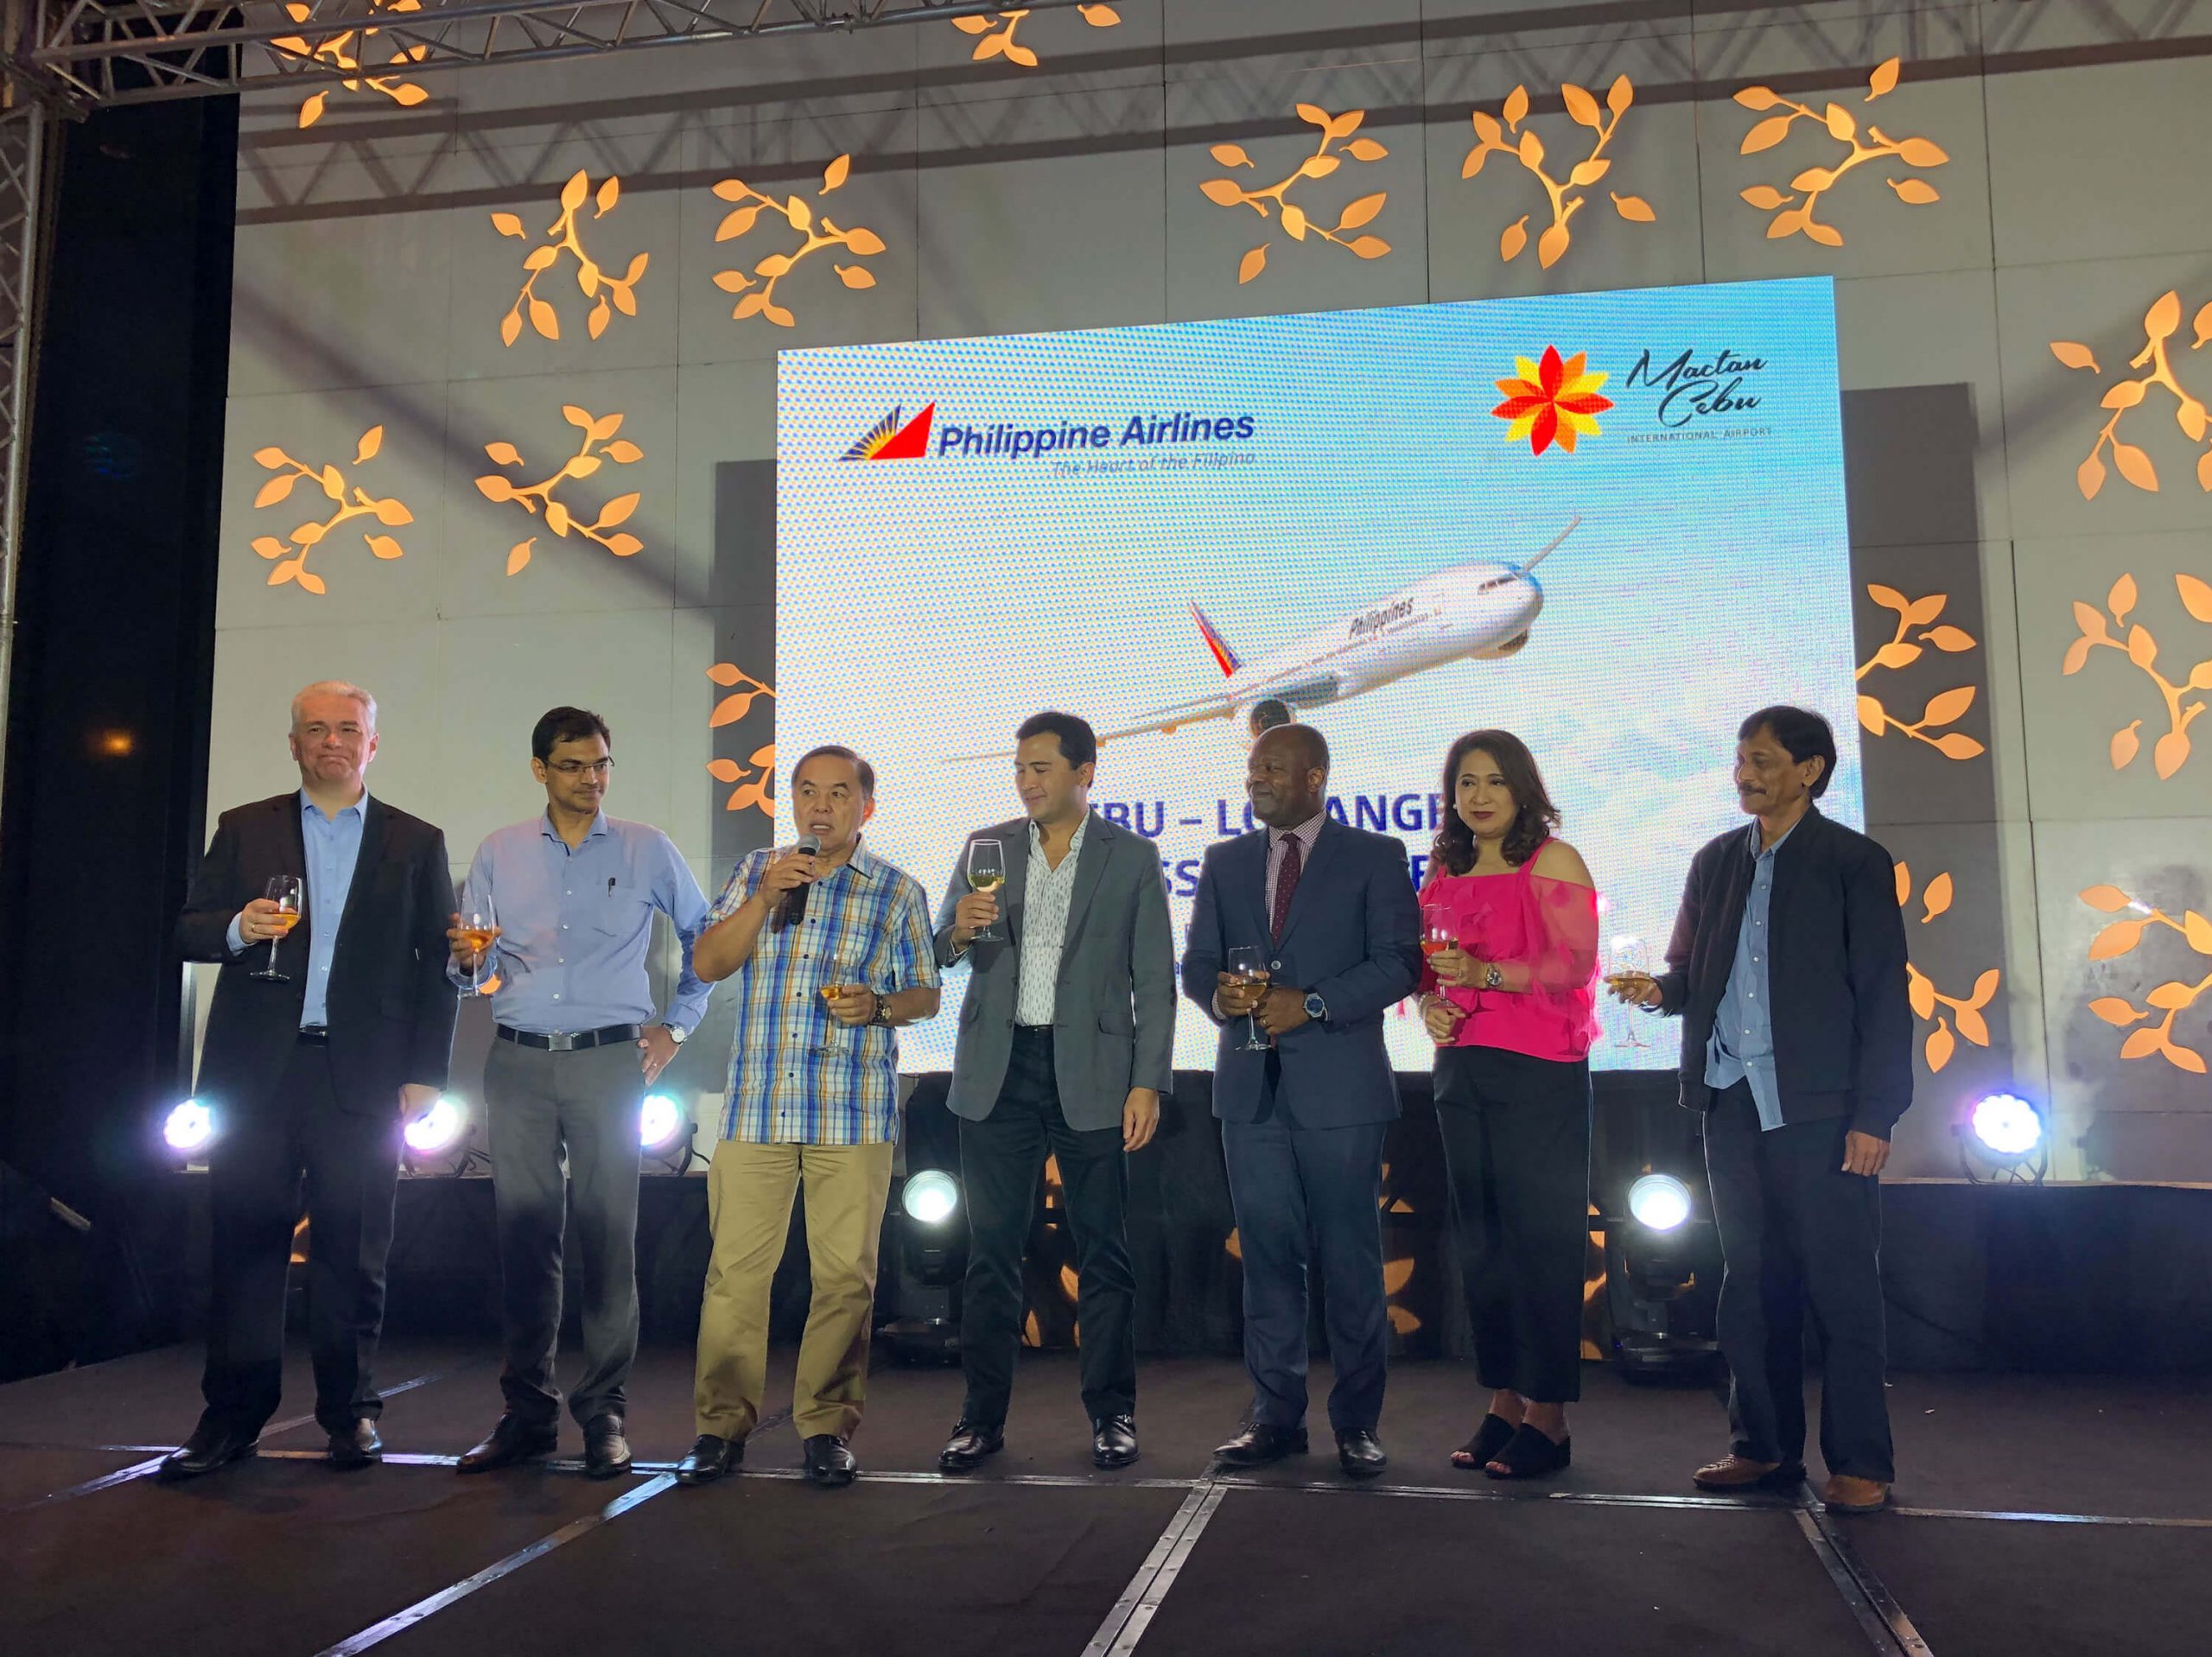 TOAST. PAL officials and guest offer a toast to the success of the Cebu-LA route.